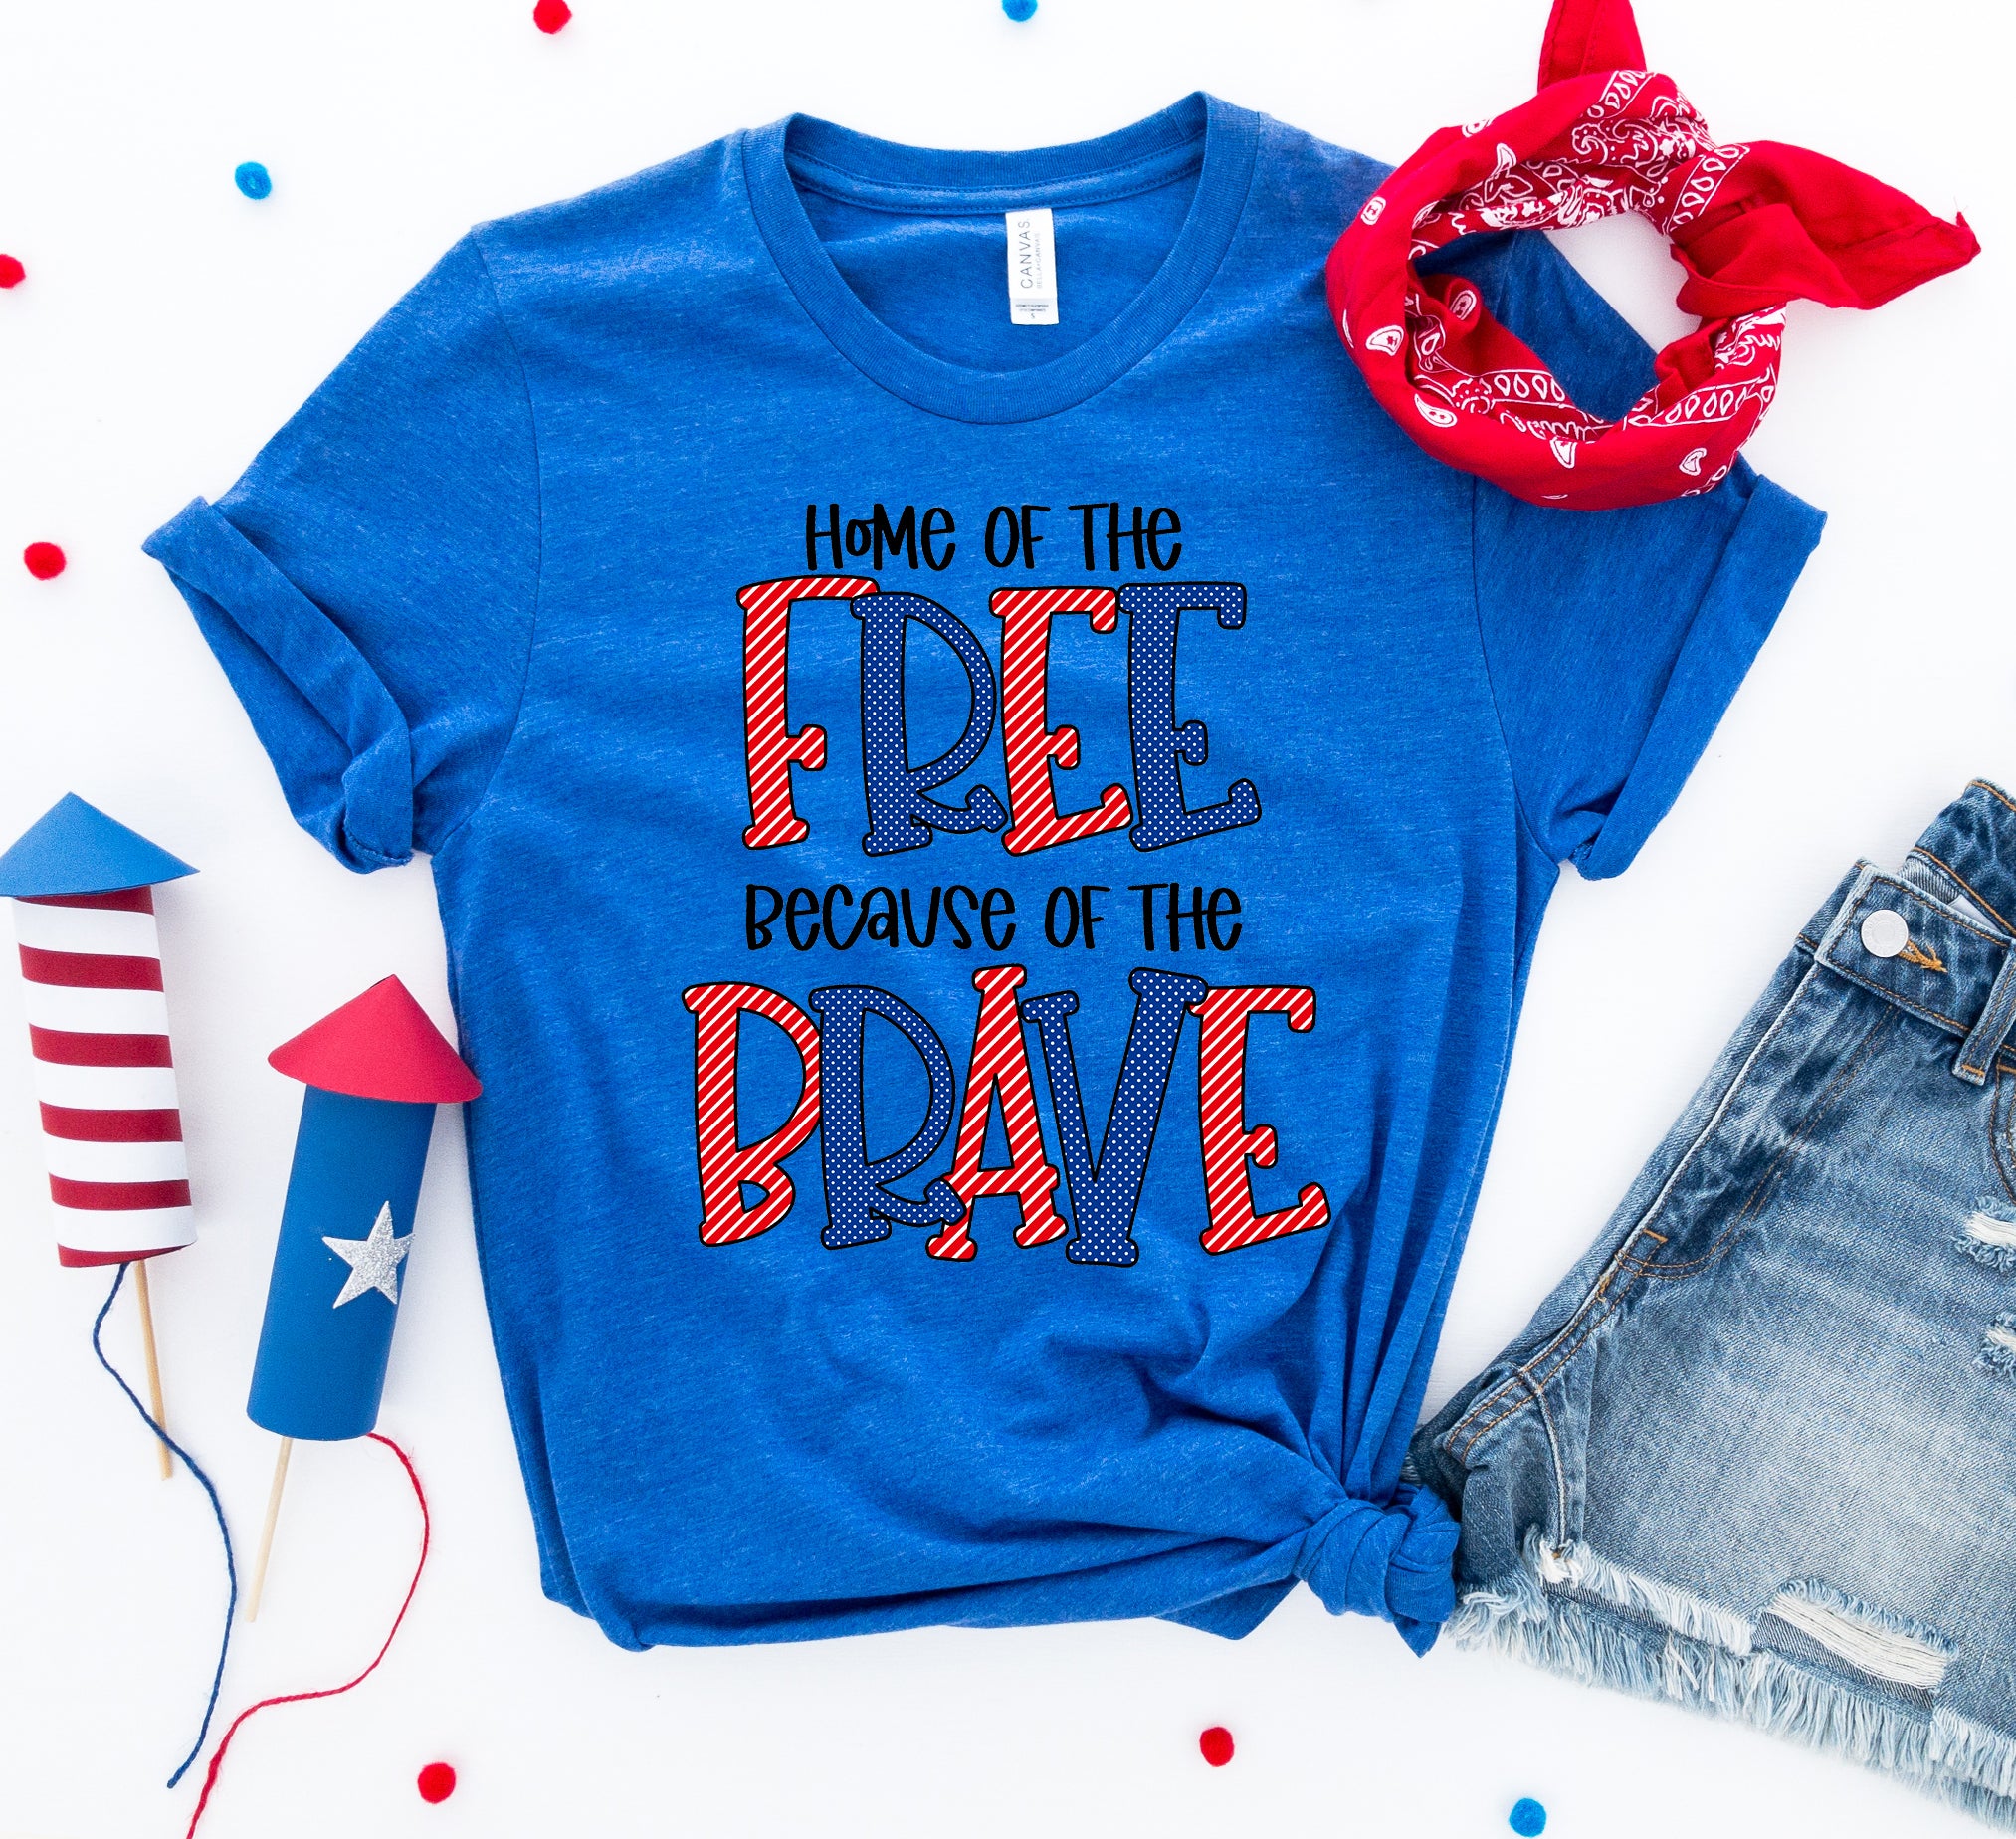 Home of the free because of the brave T-shirt